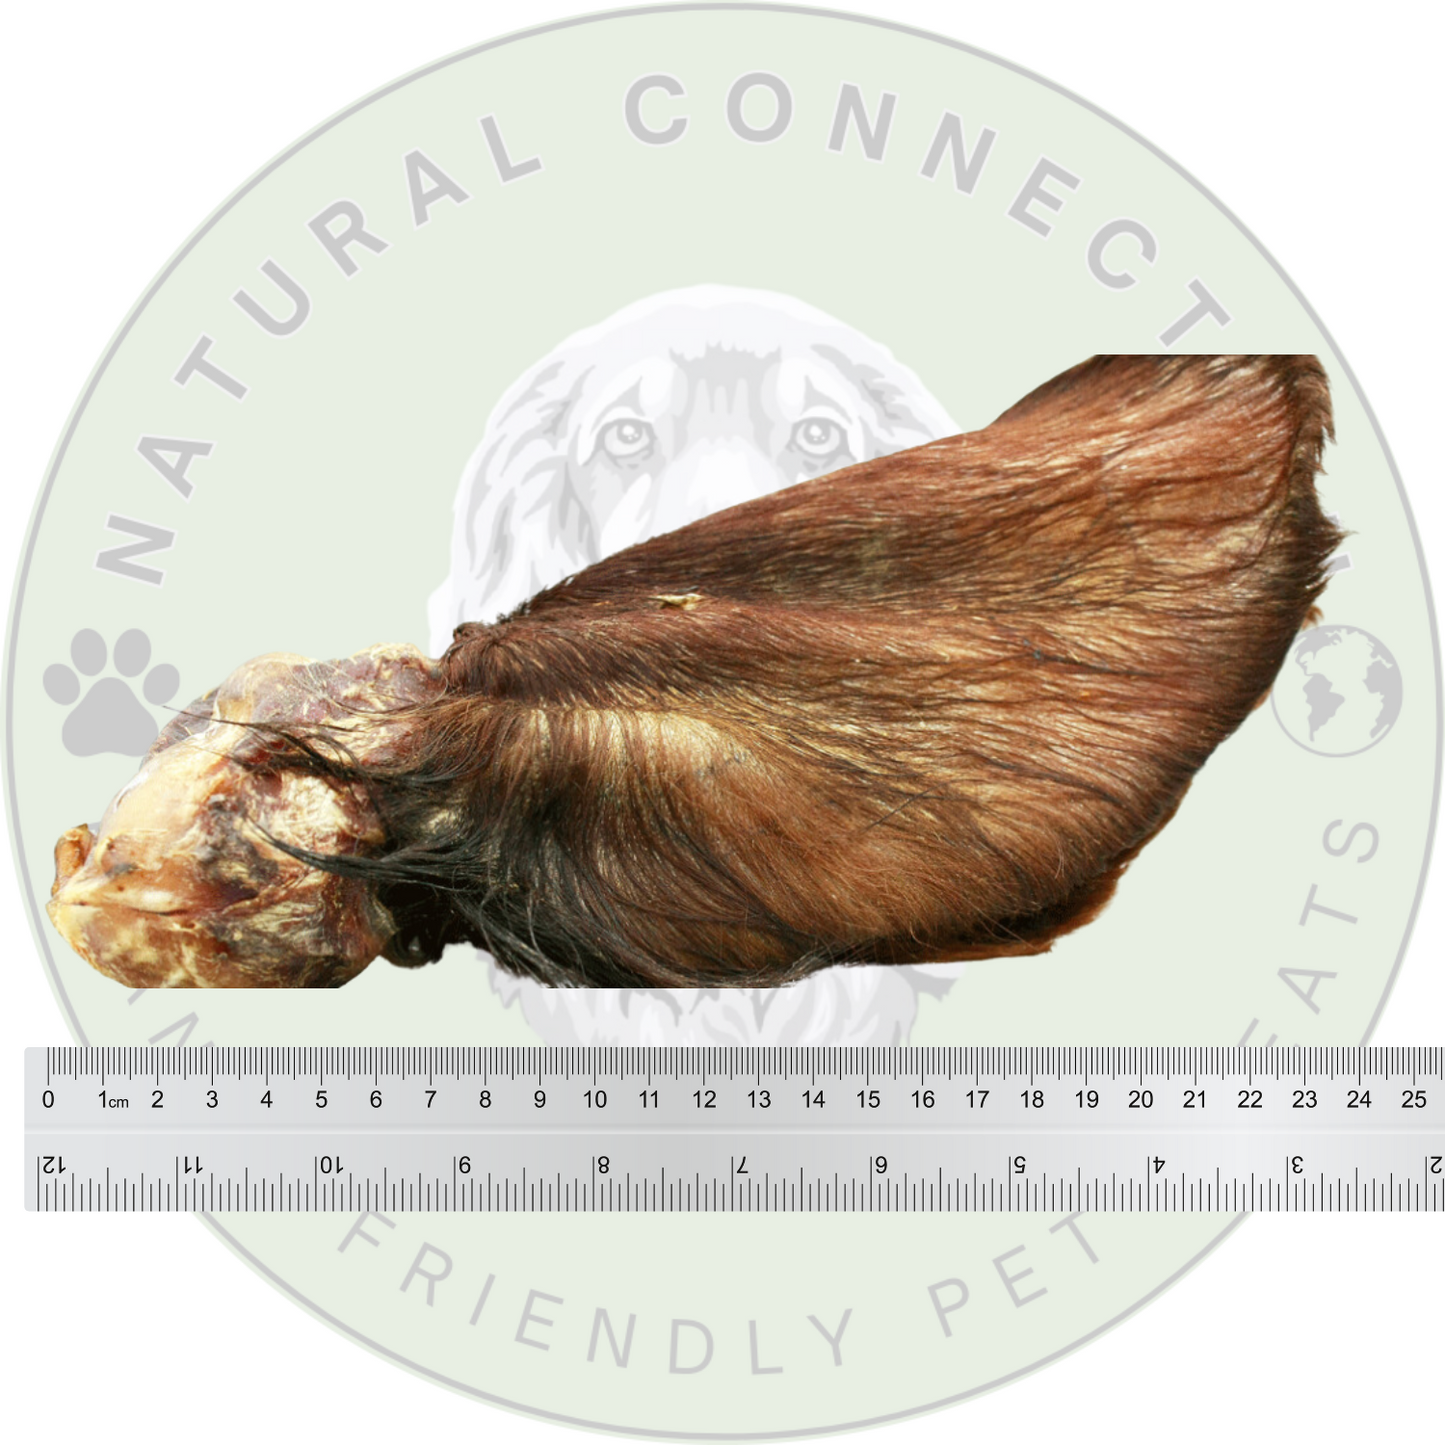 Hairy Veal Ear | Premium Quality Large Dog Chew by Natural Connection